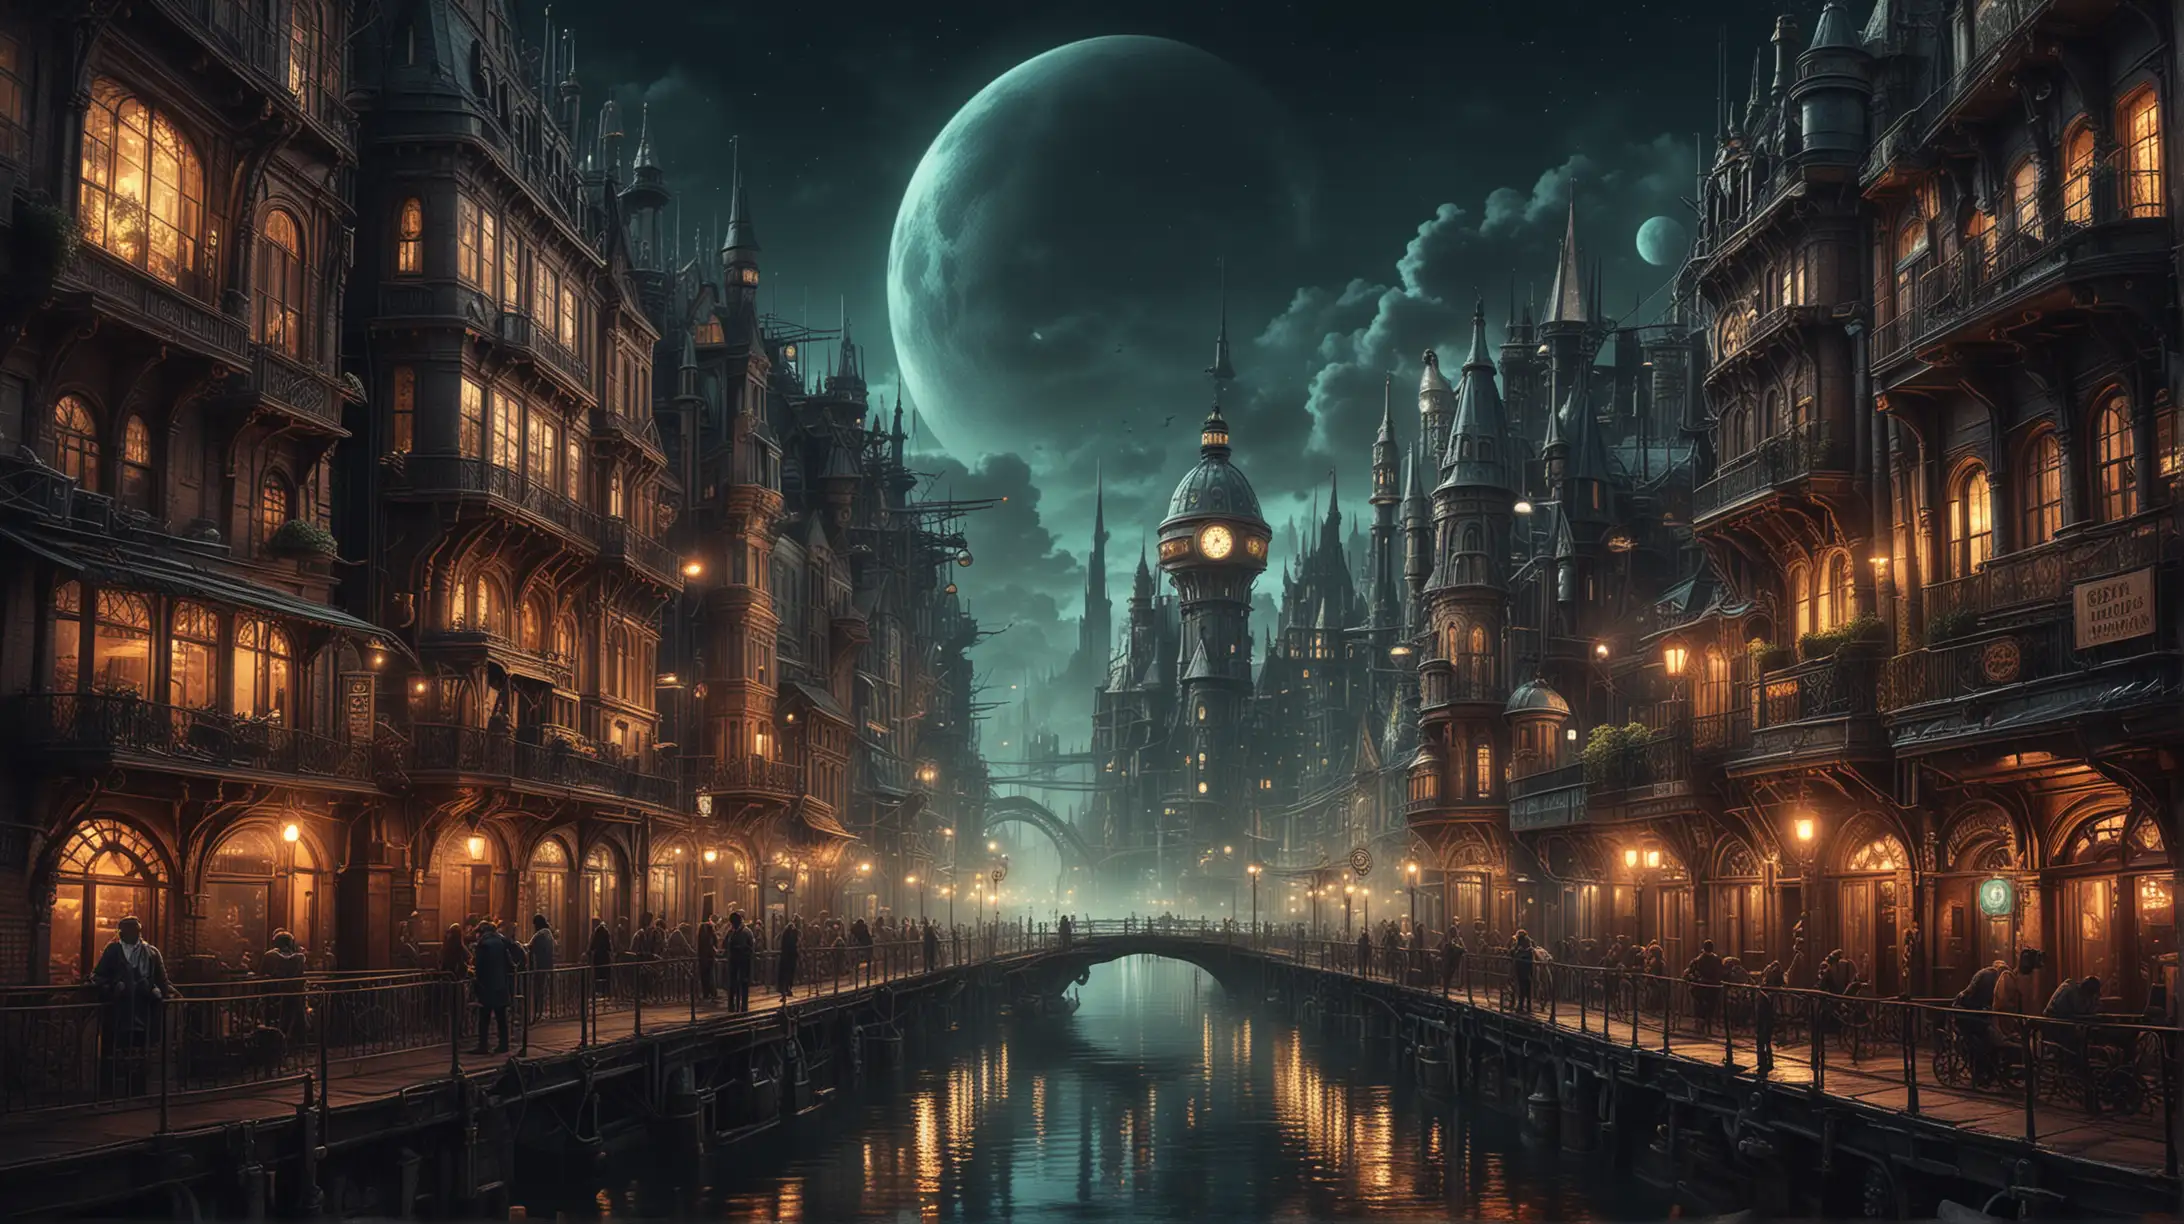 a psychodelic vision of a steampunk city by night